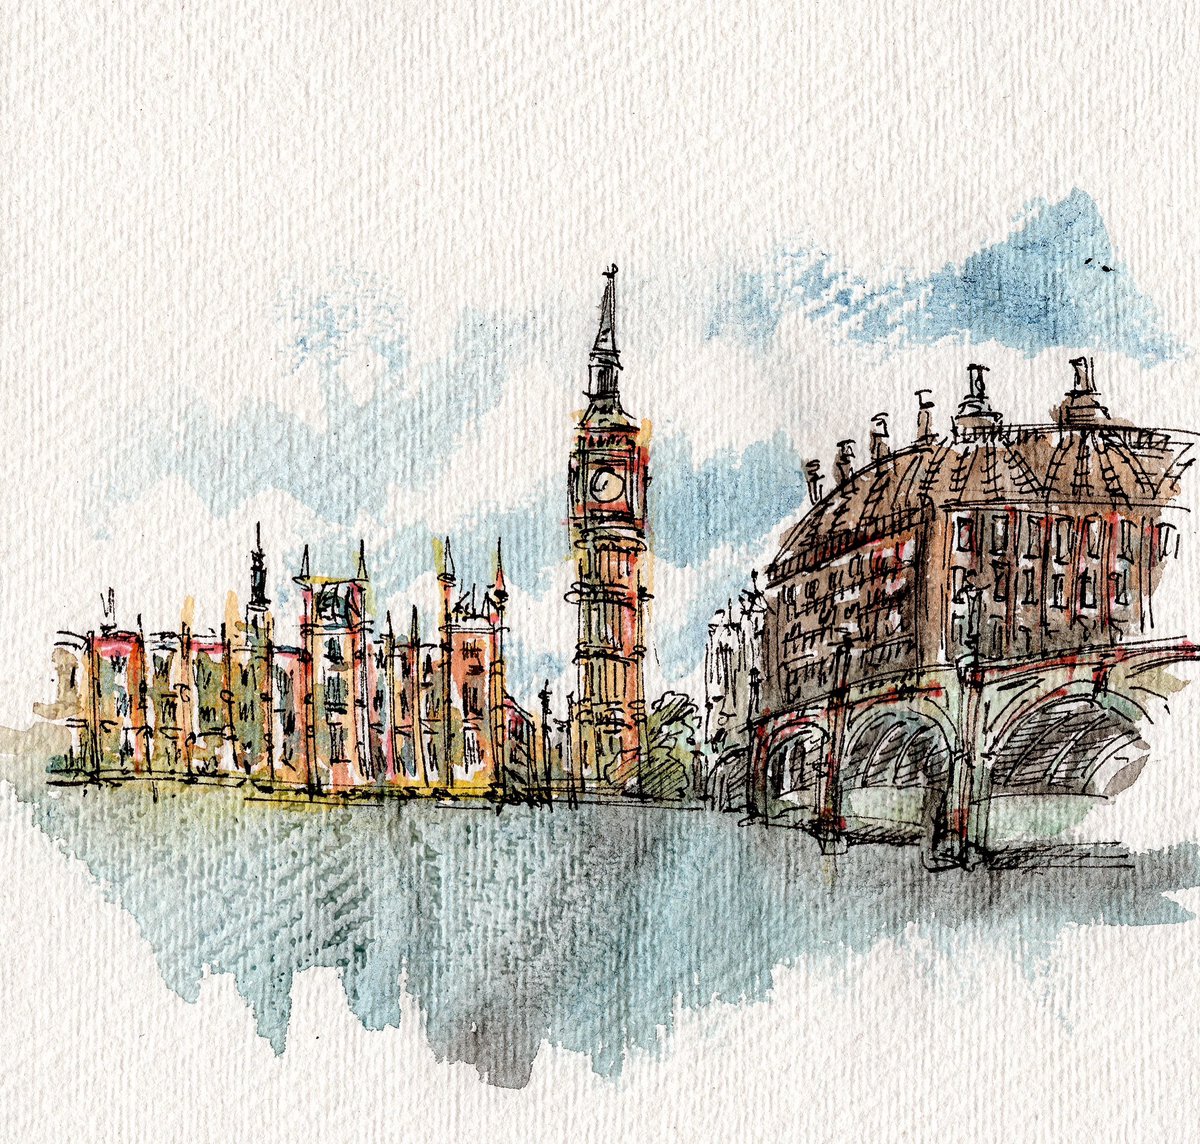 Probably one of the most photographed views of London. Watercolour on Khadi cotton rag paper. 

#london #bigben #housesofparliament #architecture #art #illustration #painting #watercolour #khadipaper #sketch